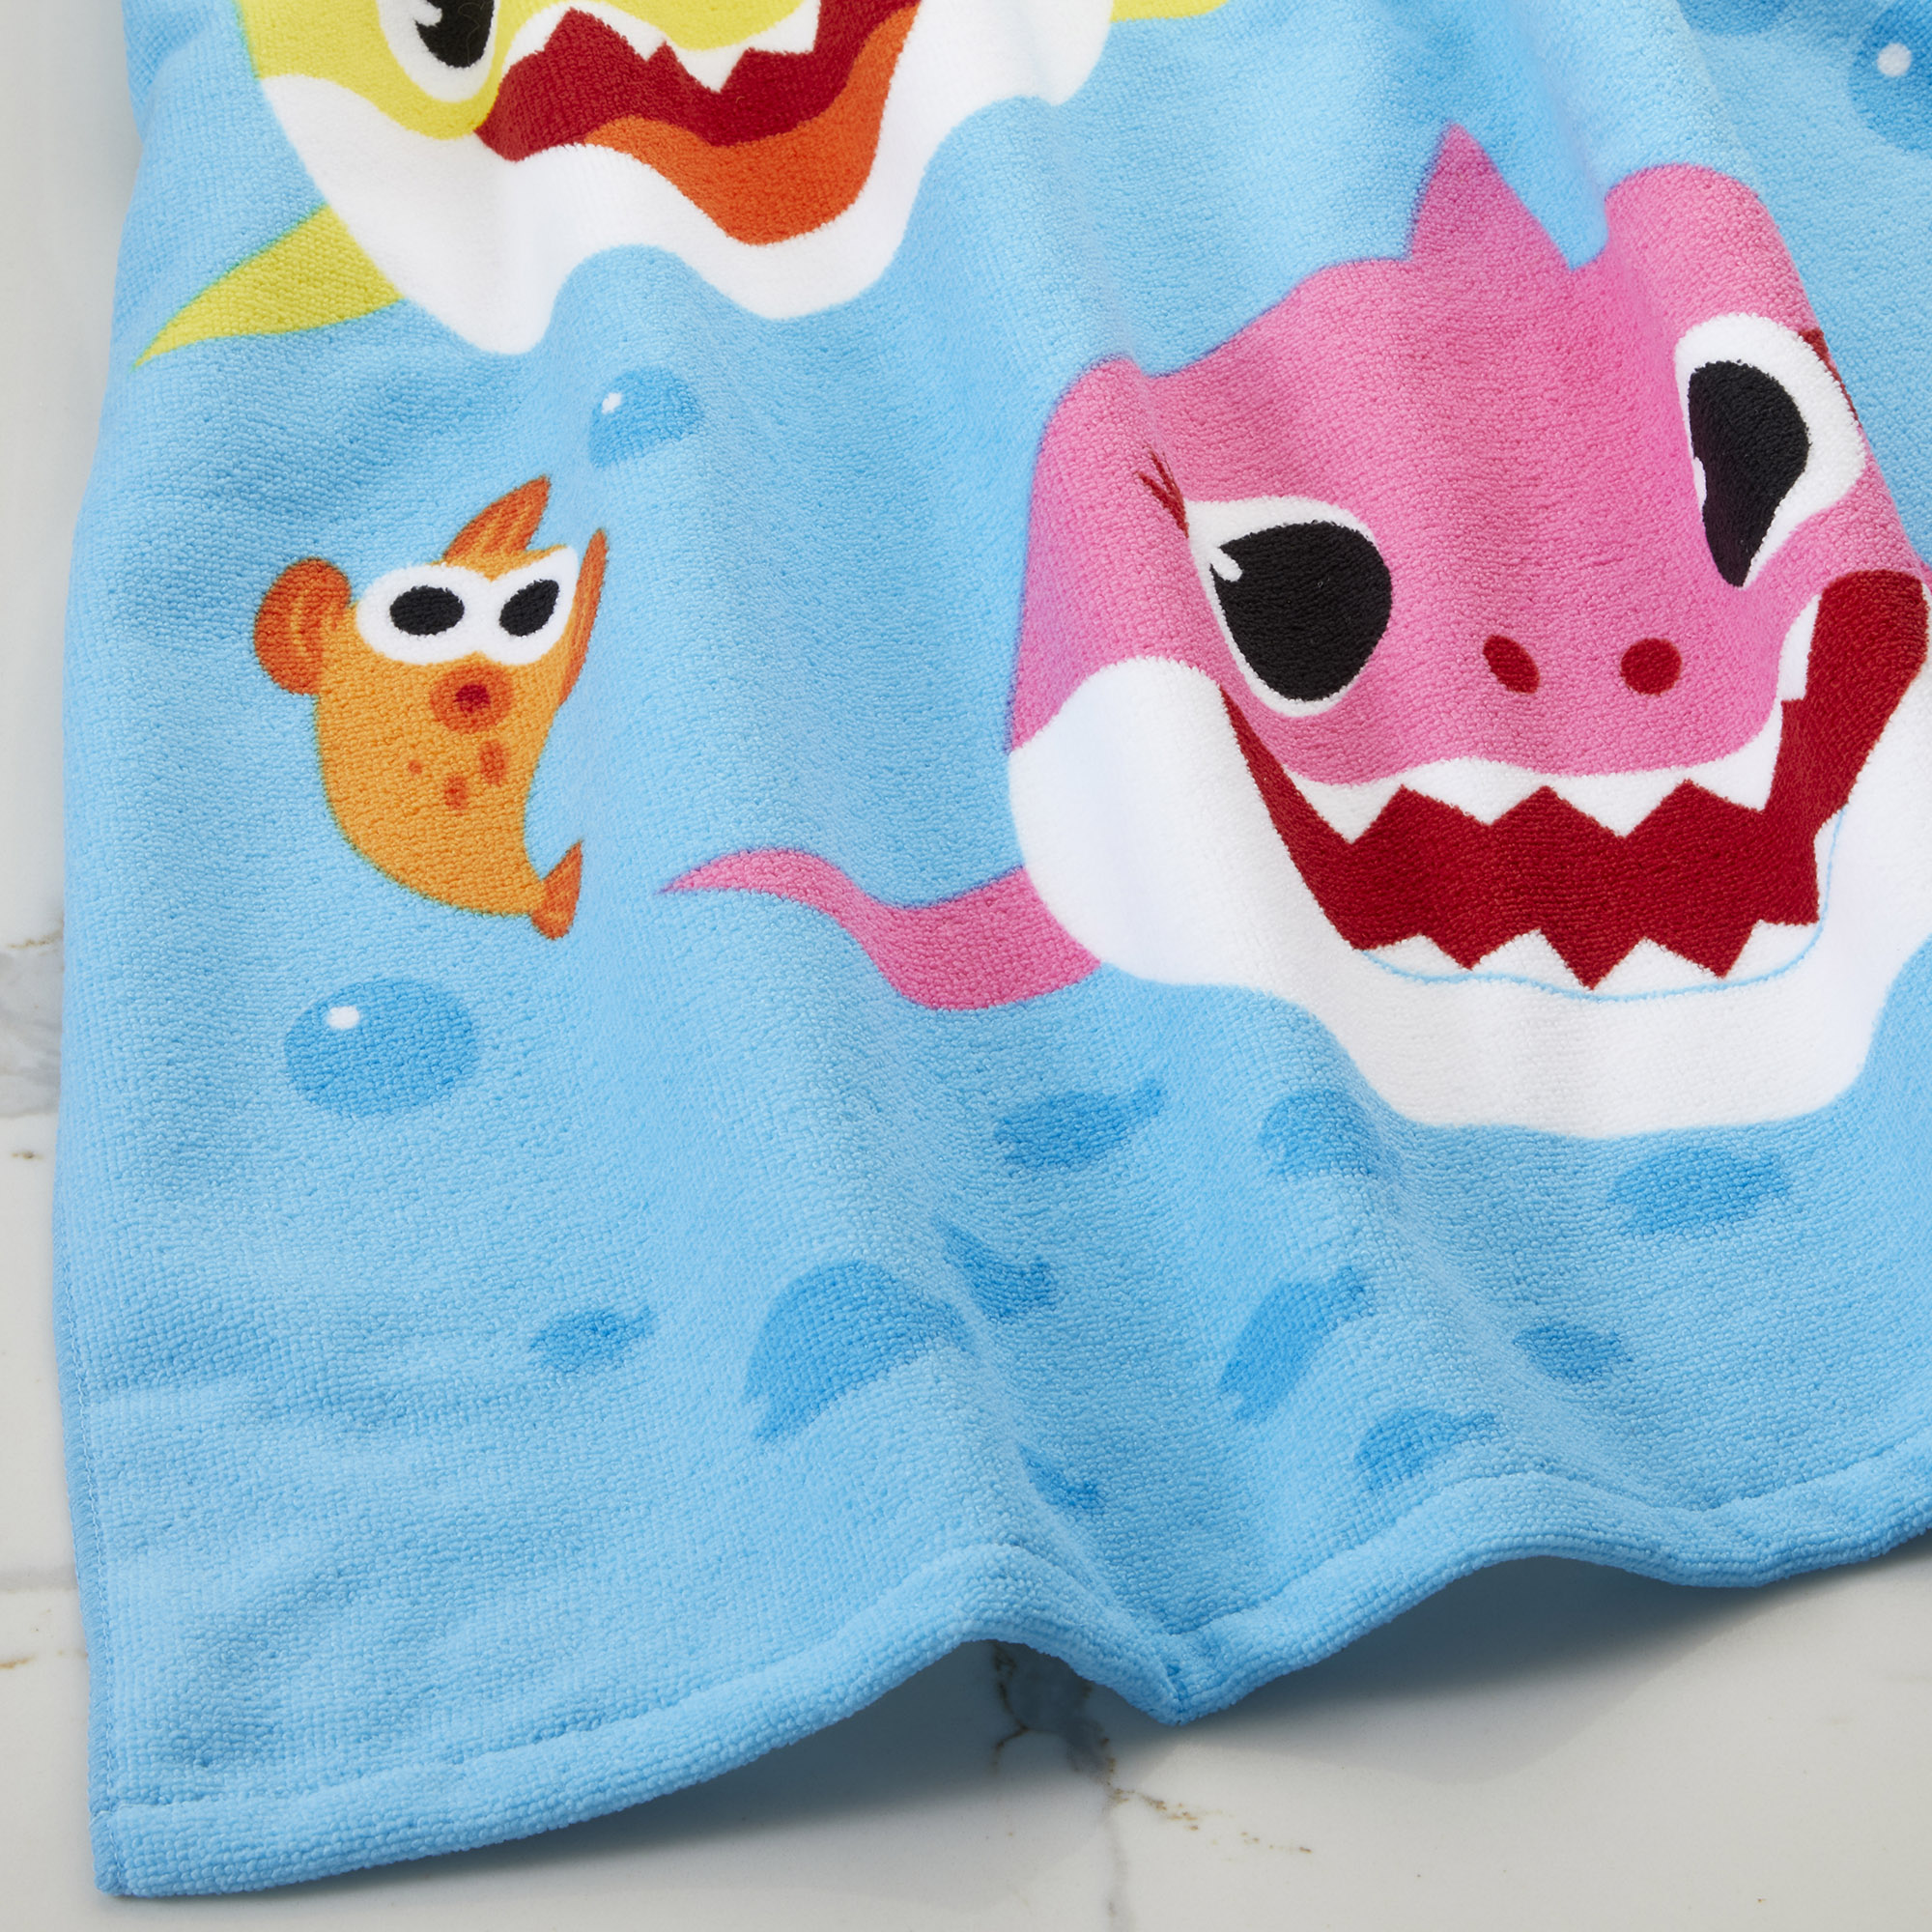 Baby Shark Kids Towel and Character Scrubby Set, Blue, Pinkfong - image 5 of 13